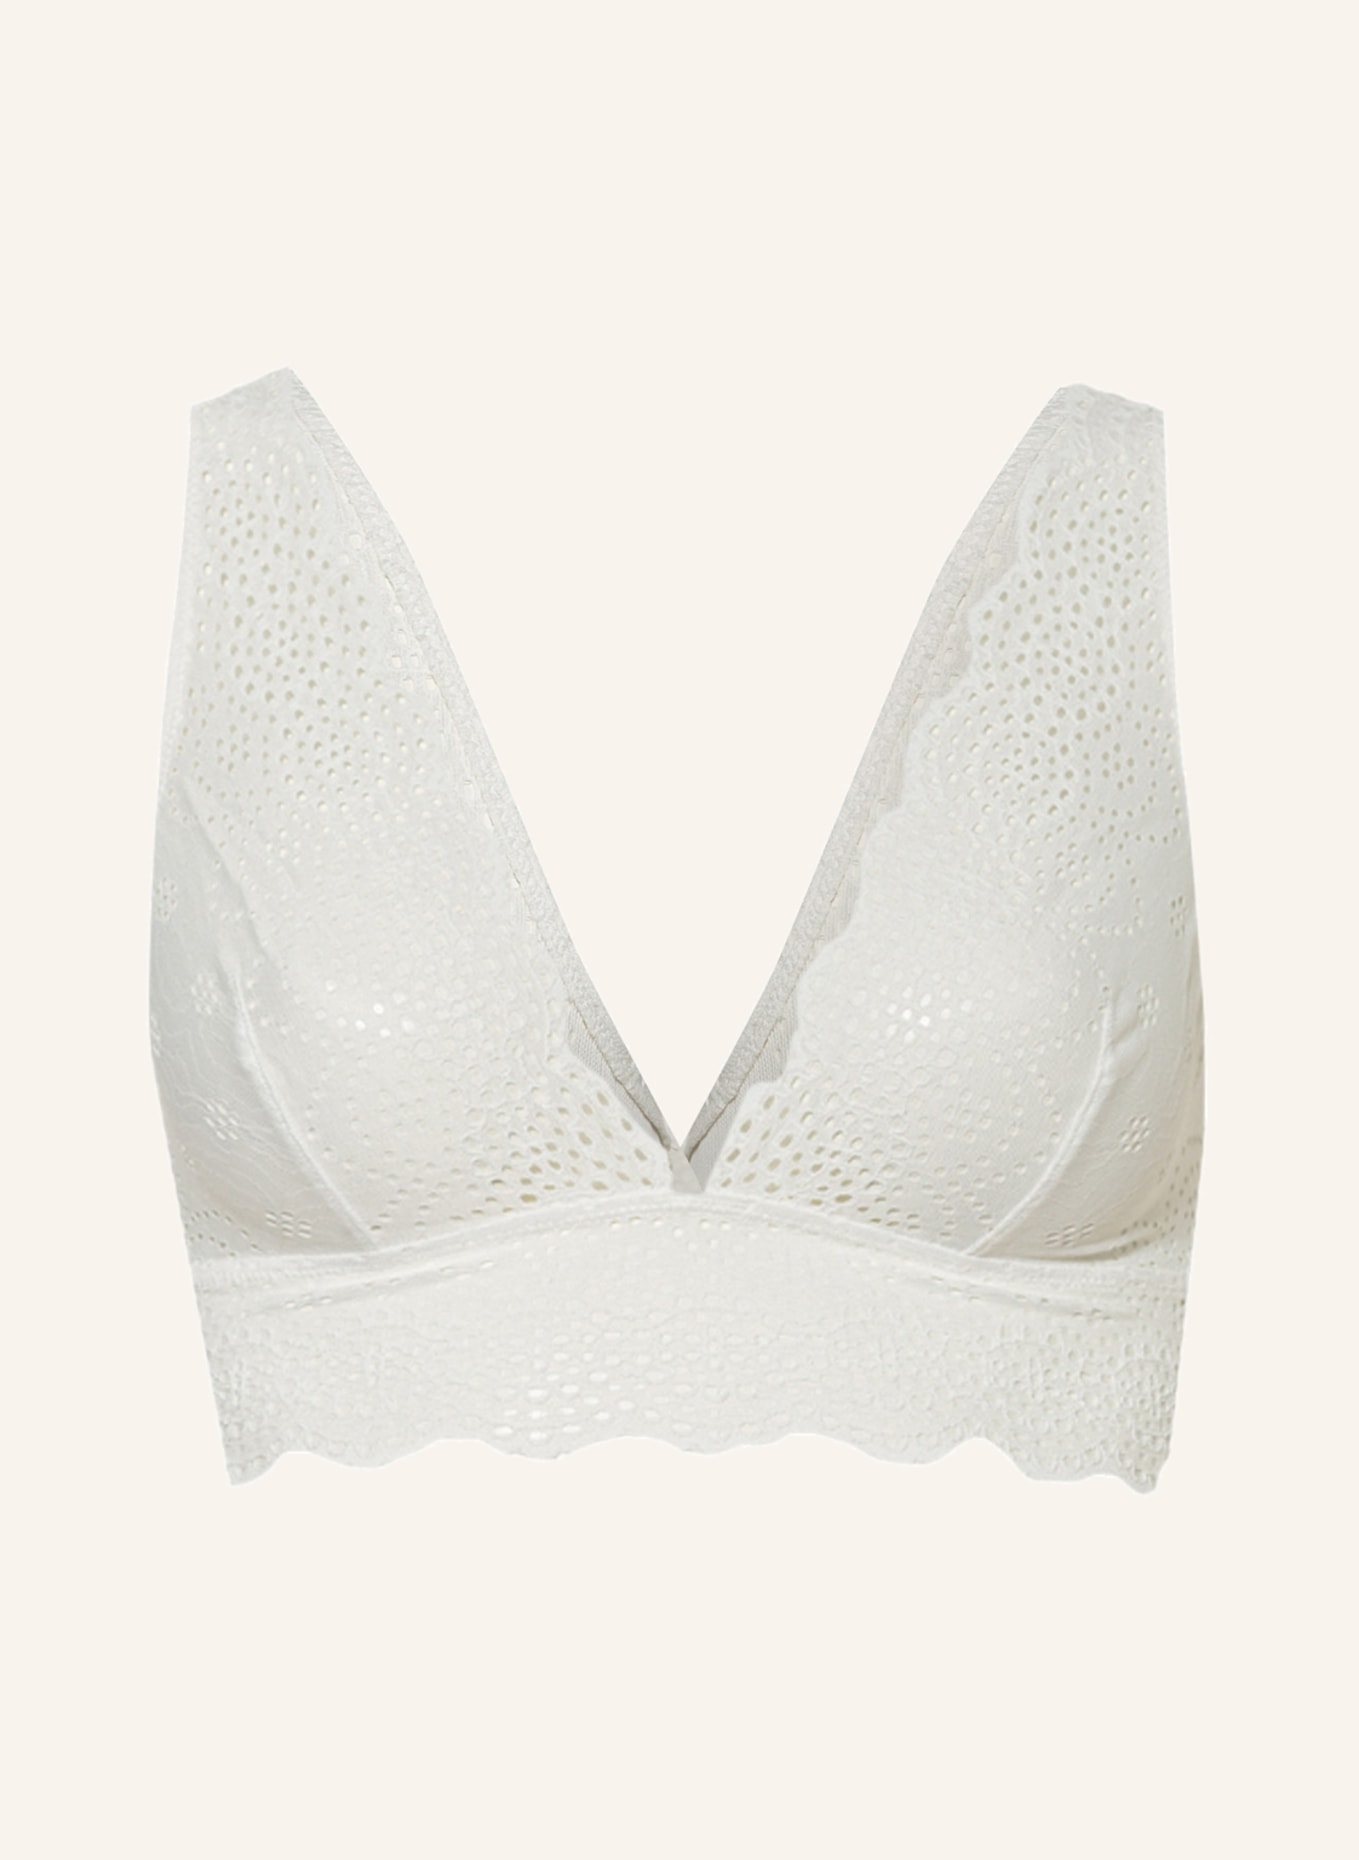 Skiny Bustier EVERY DAY IN BAMBOO LACE, Farbe: WEISS (Bild 1)